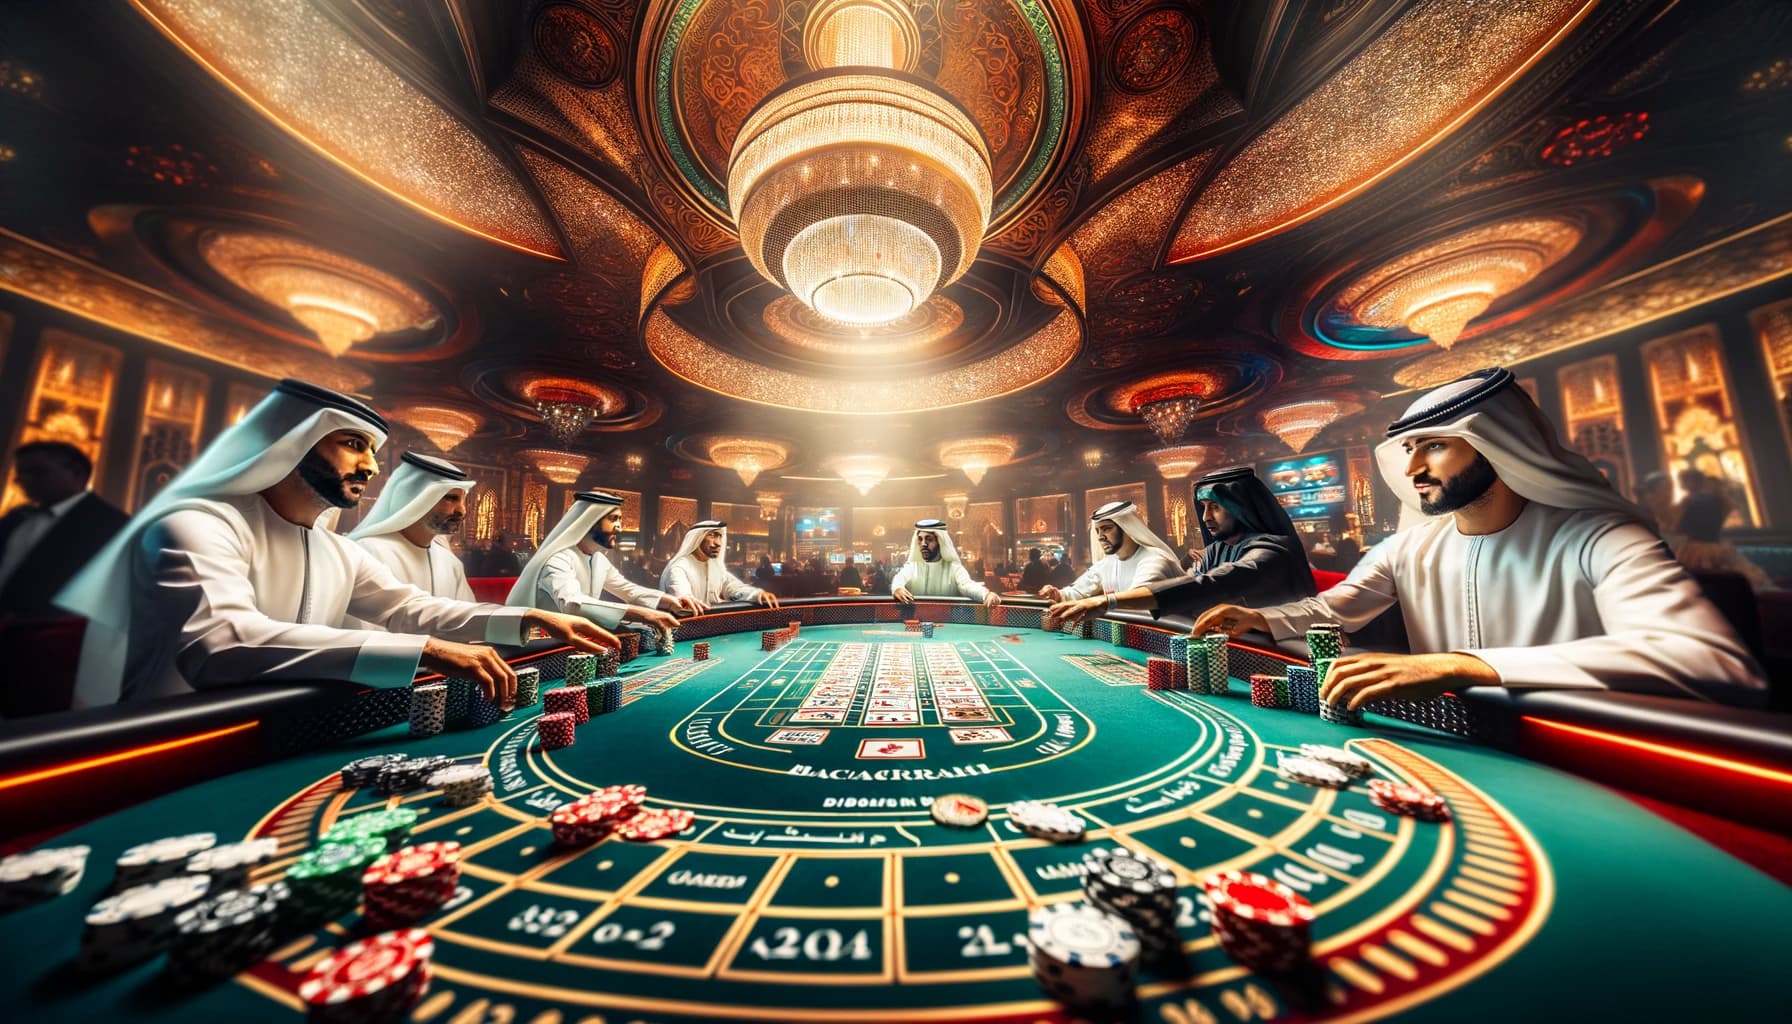 A dynamic view of a Baccarat card game in an Arabic casino from a different angle. The image should show a different perspective of the Baccarat table